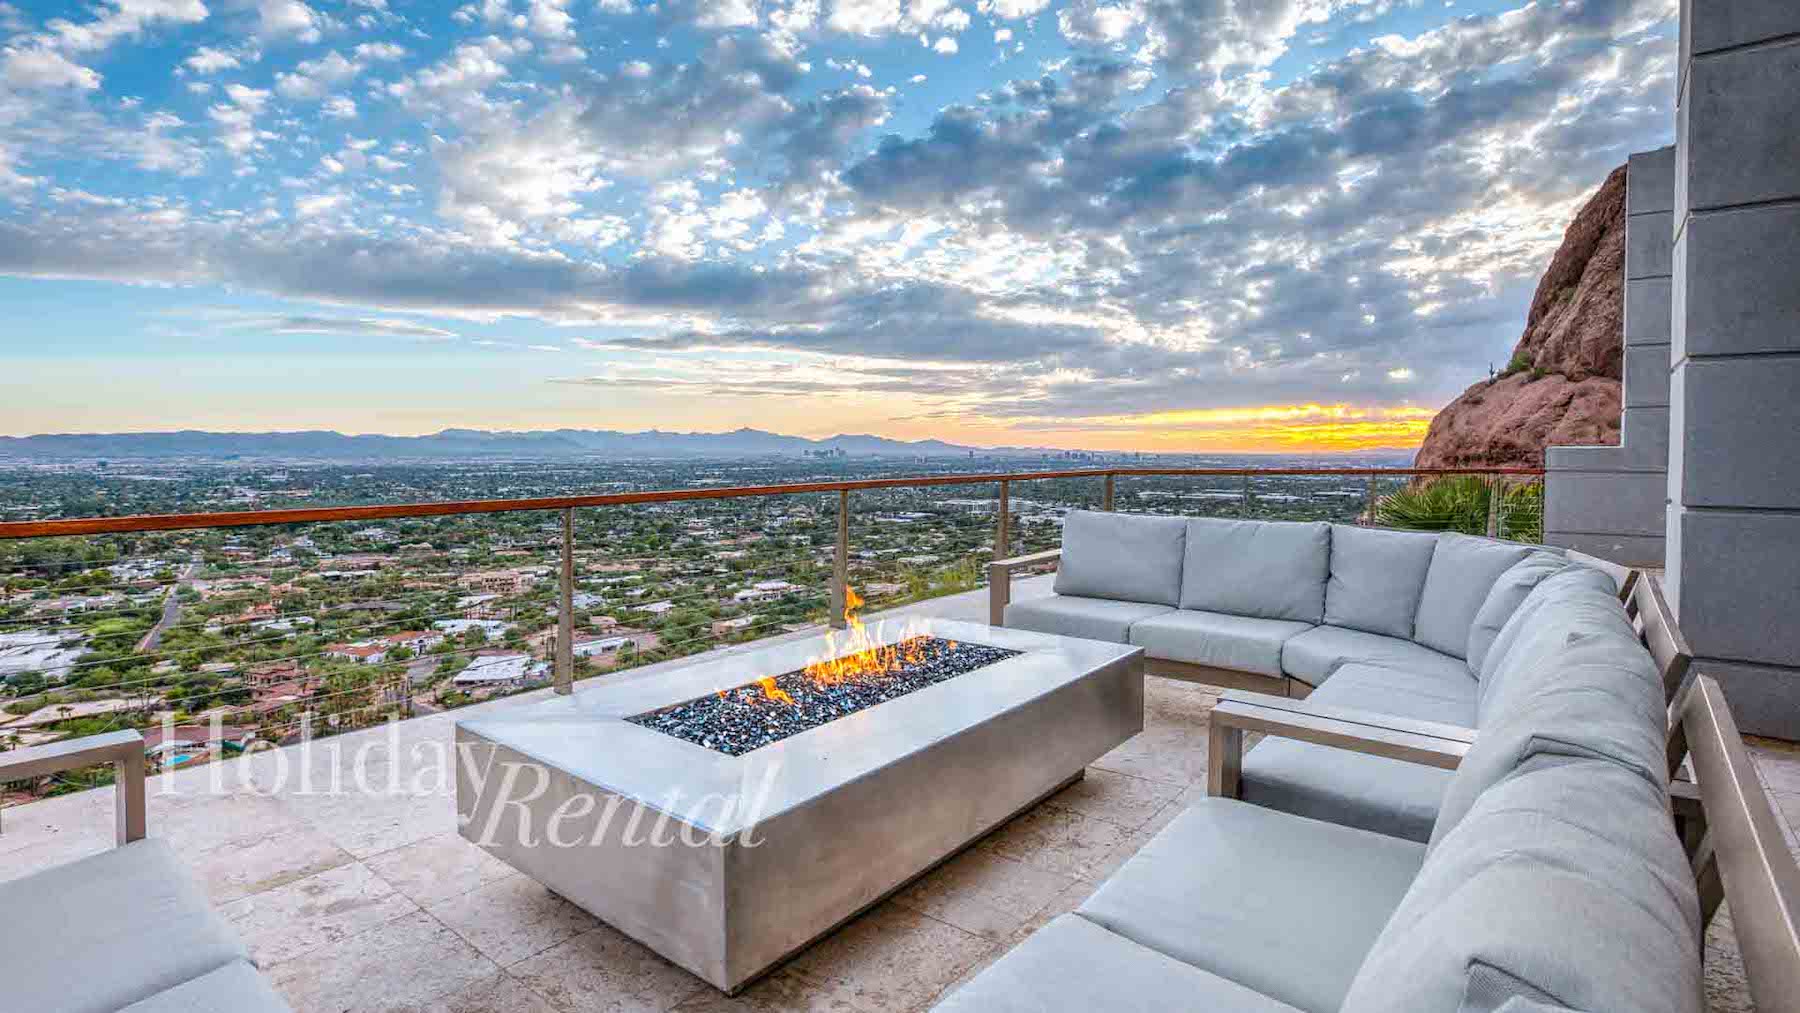 luxury vacation rental firepit with views